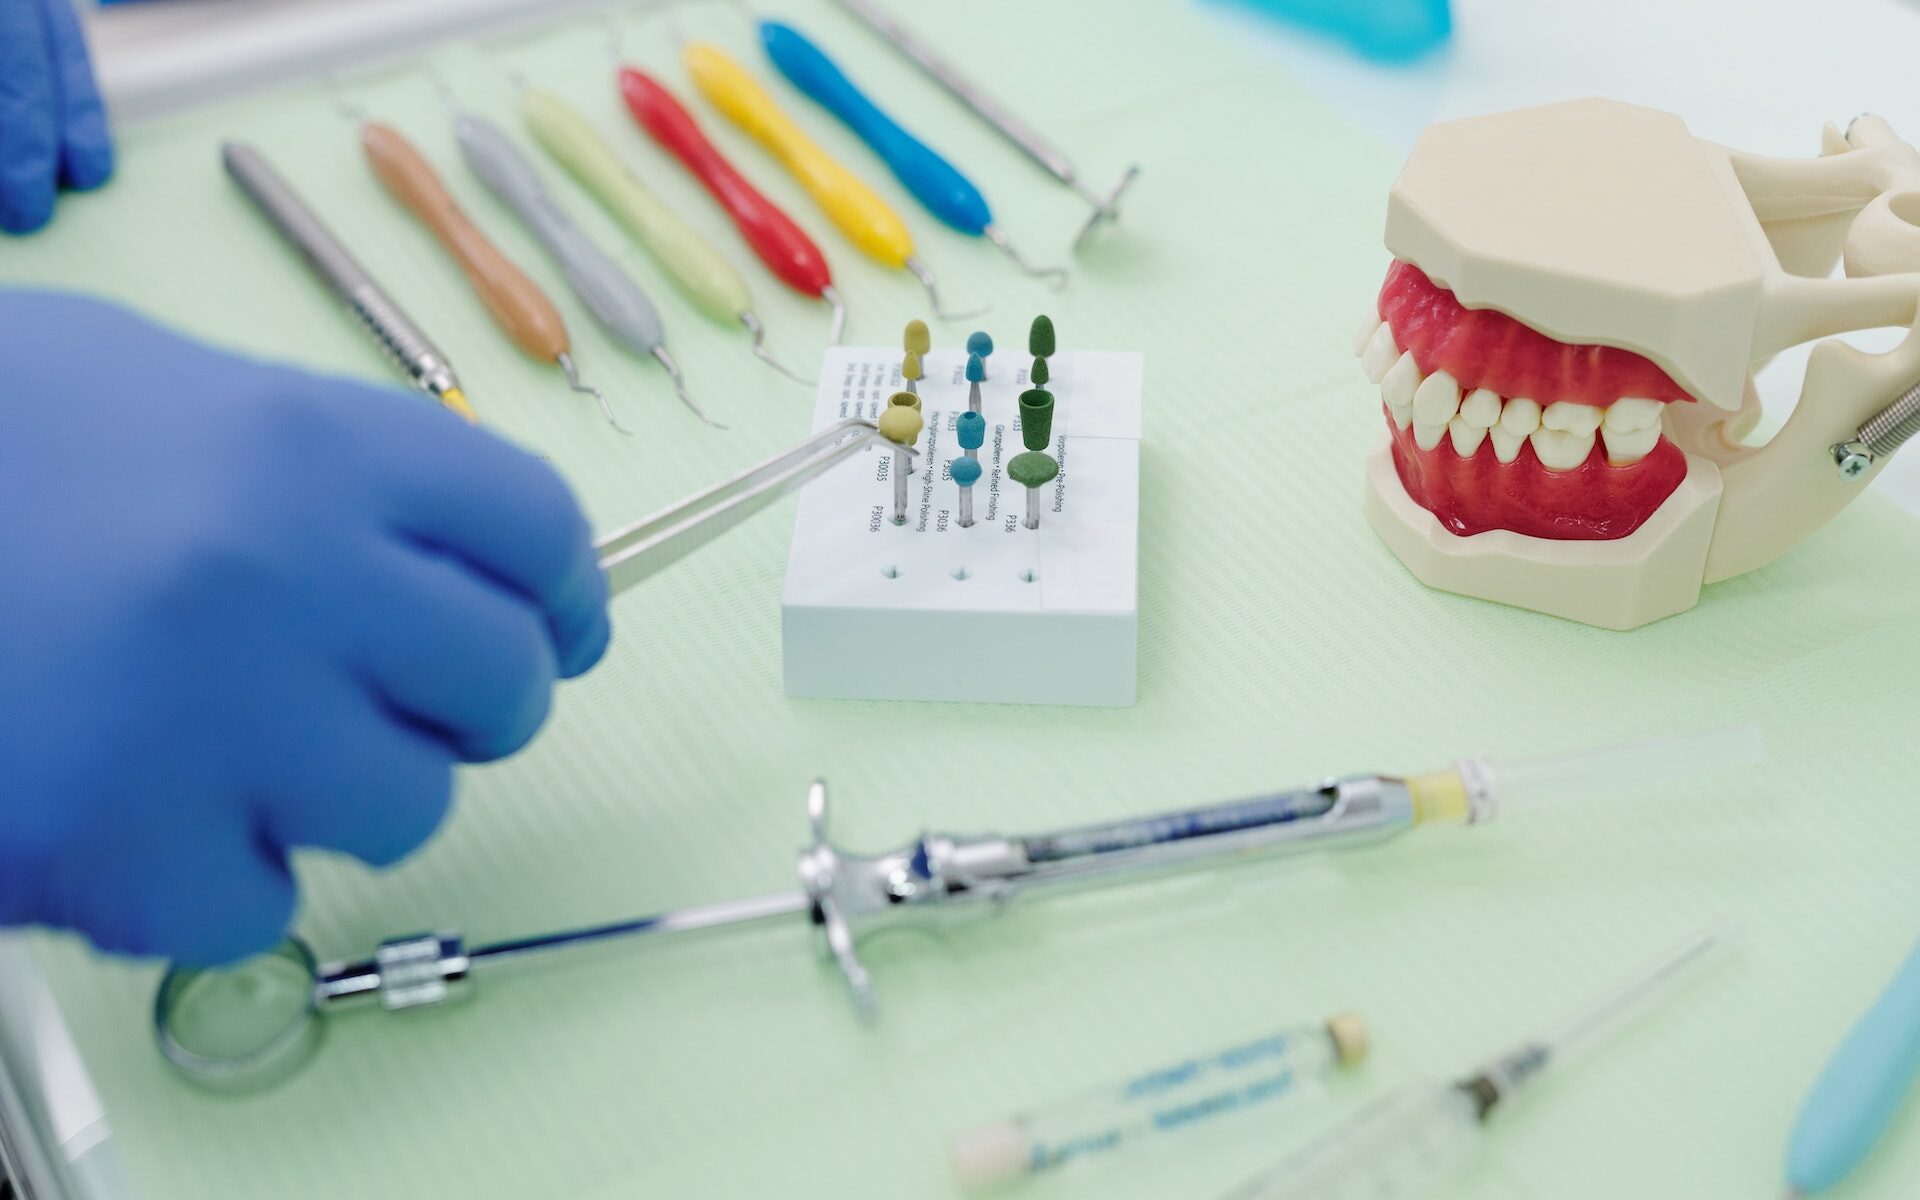 How Can Researchers Improve the Materials Used in Dental Treatments?